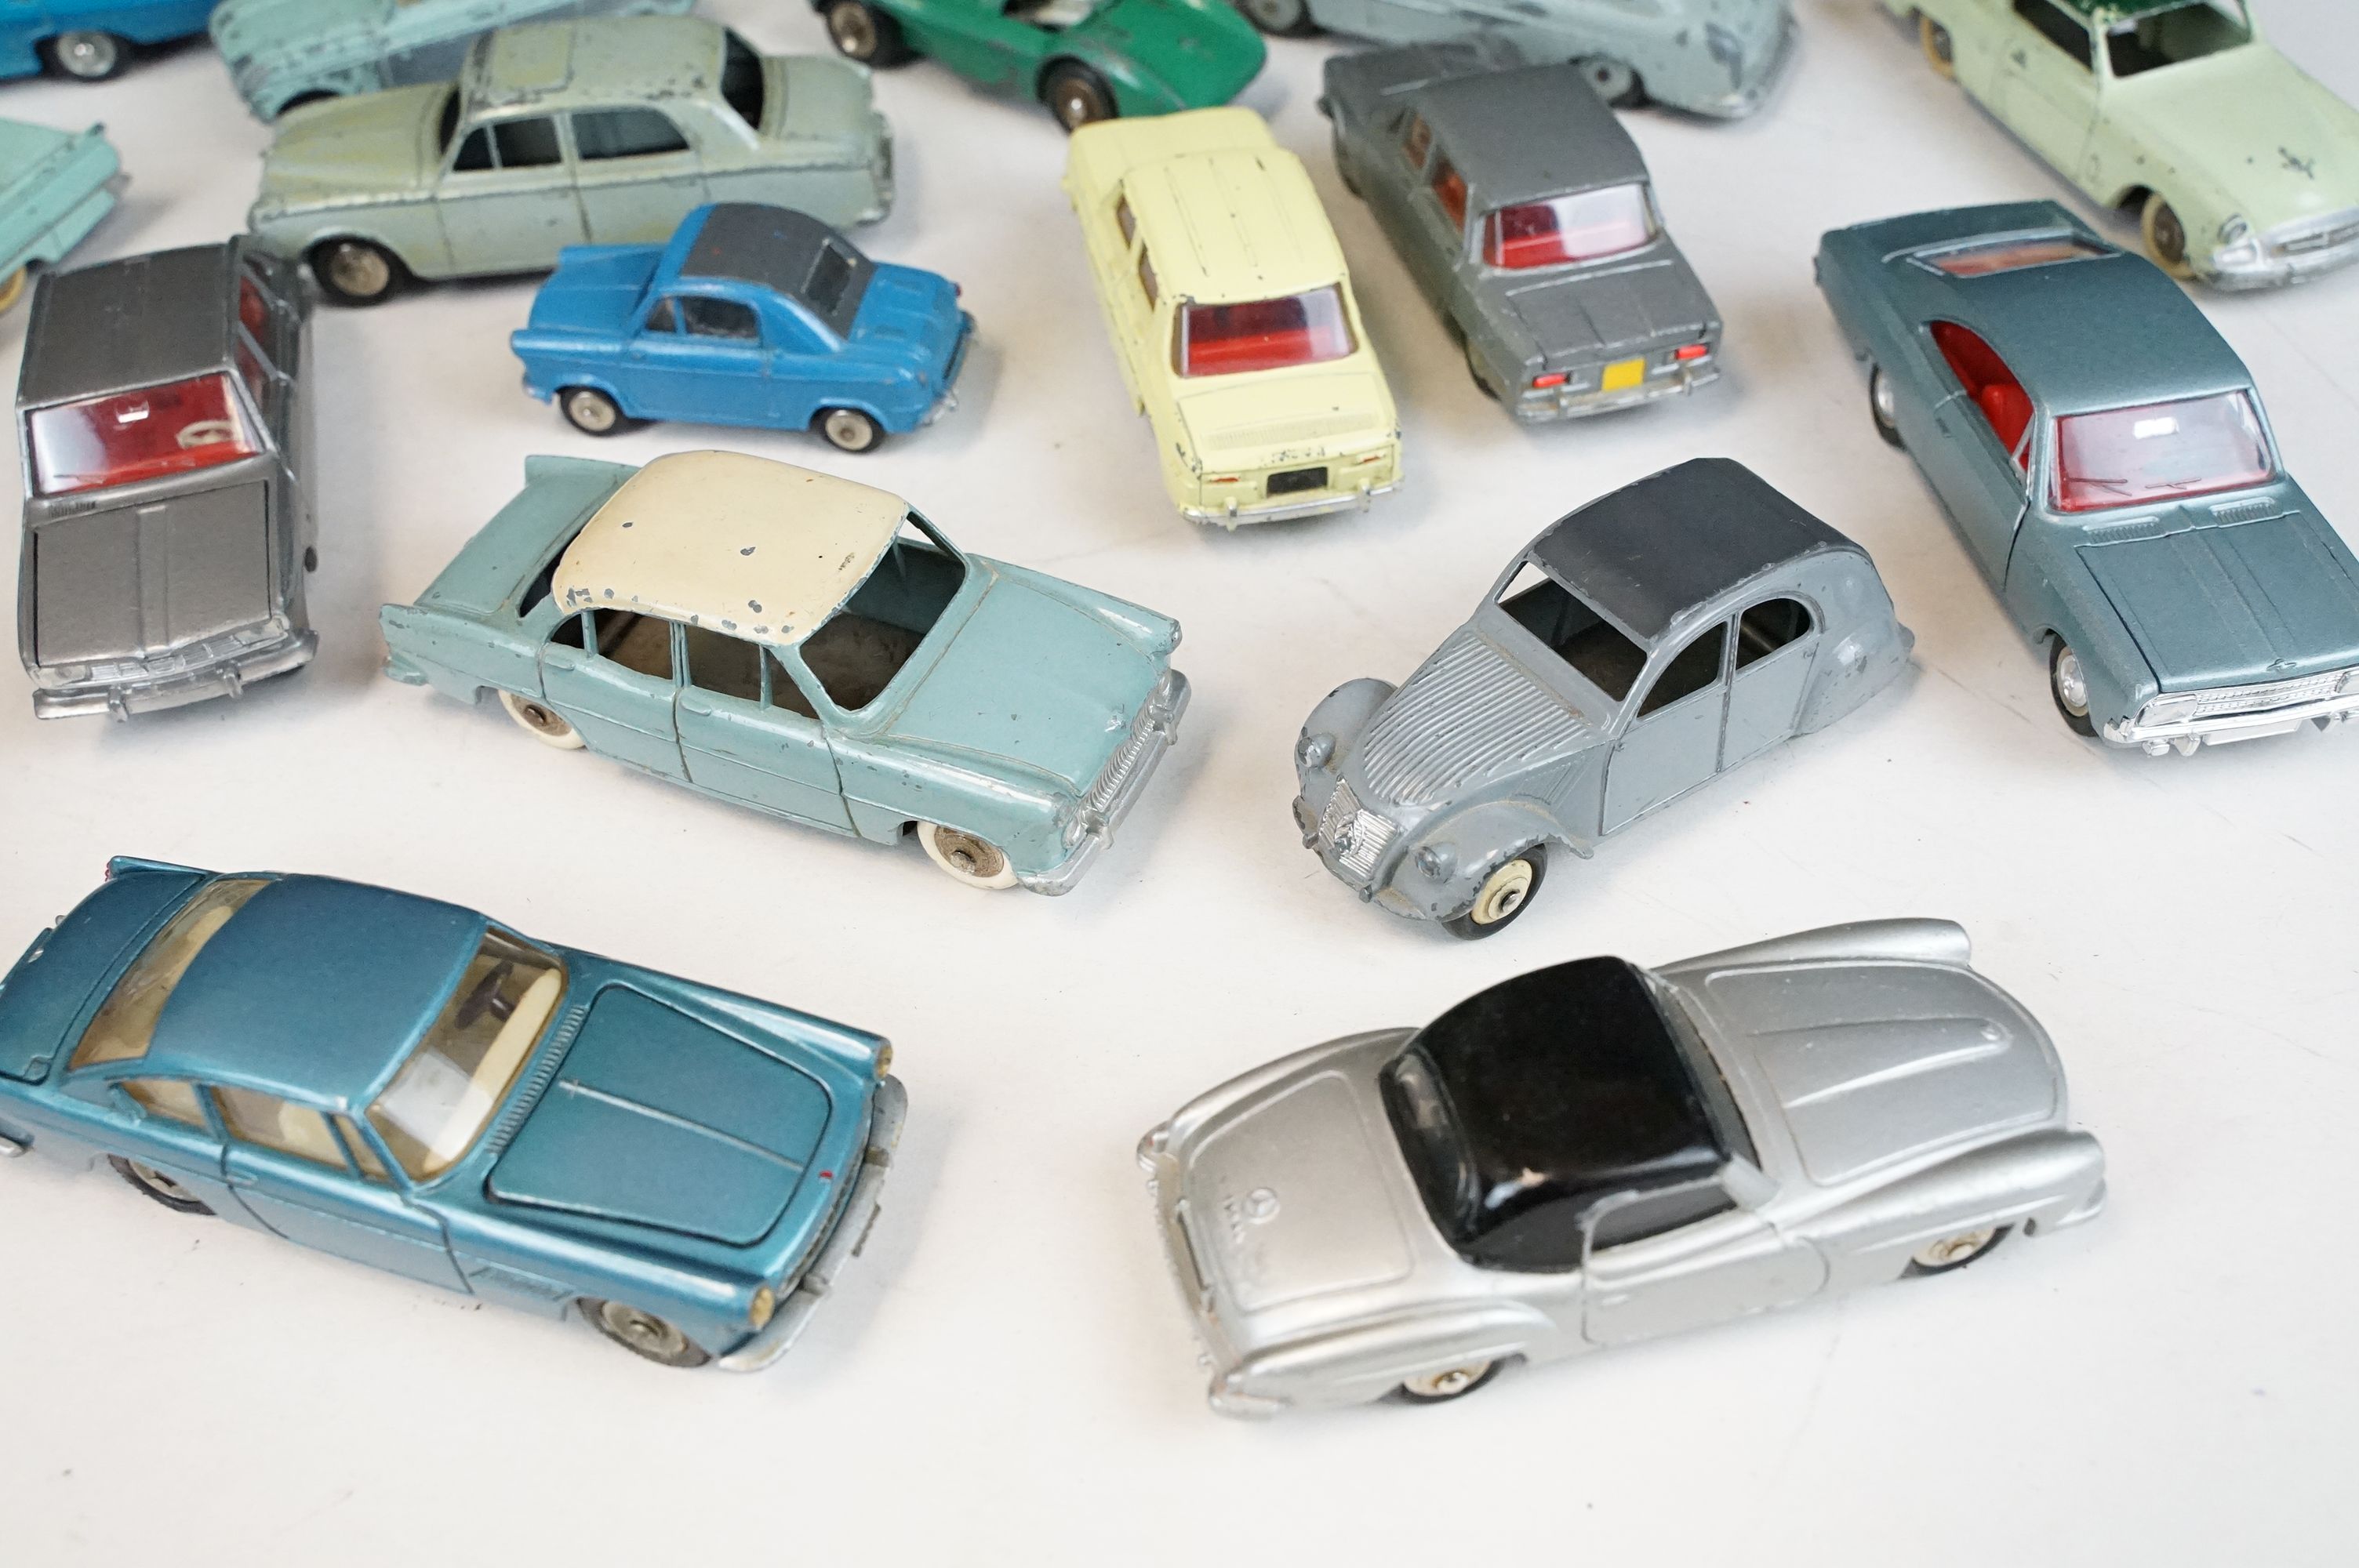 22 French Mid 20th C play worn Dinky diecast models to include Panhard PL17, 24J Coupe Alfa Romeo, - Image 2 of 9